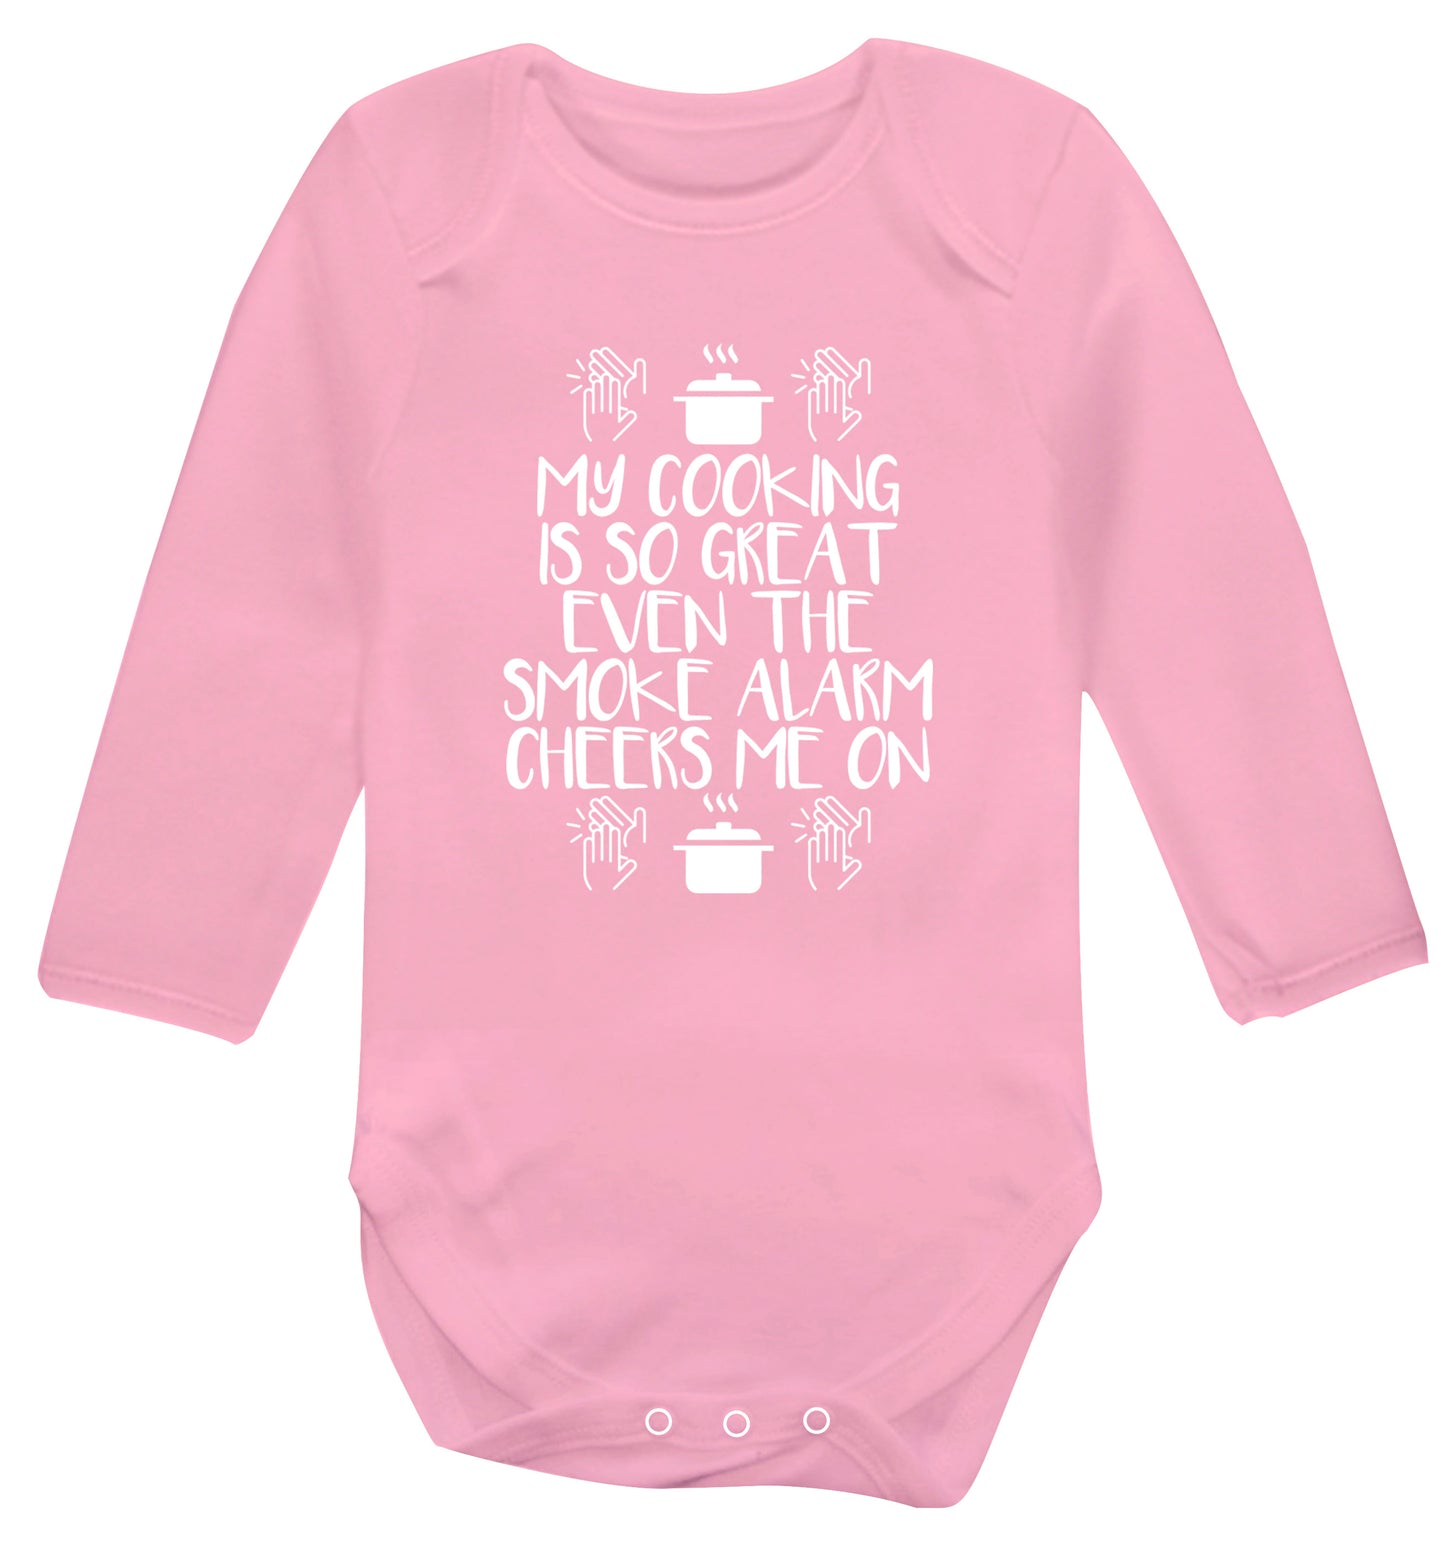 My cooking is so great even the smoke alarm cheers me on! Baby Vest long sleeved pale pink 6-12 months